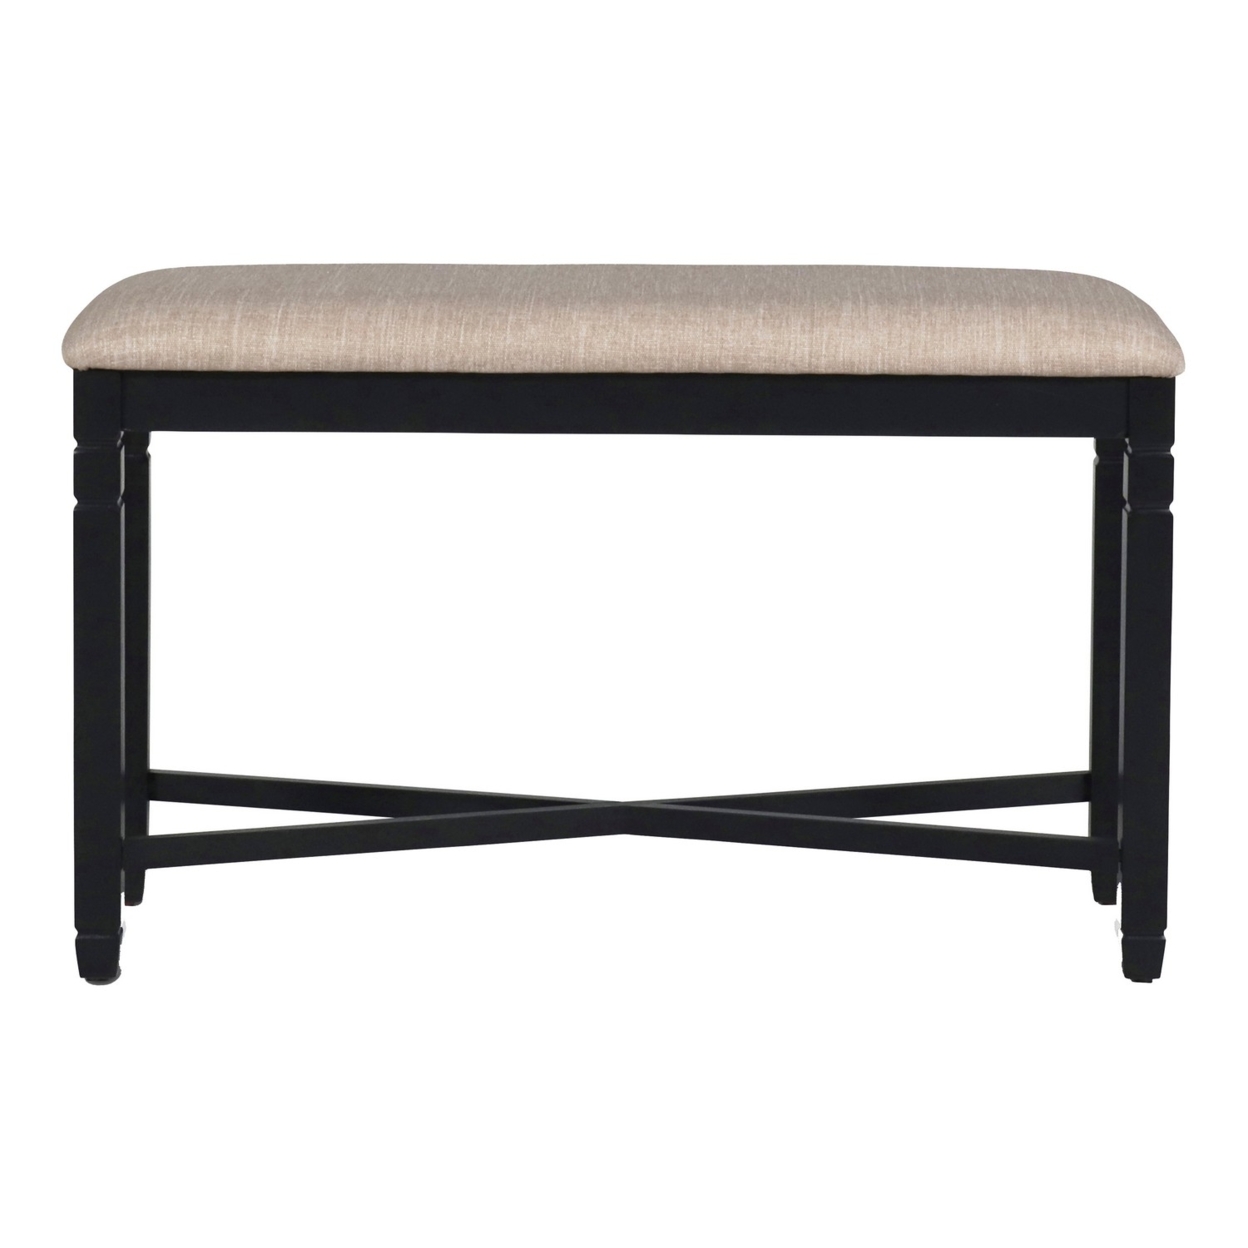 Fabric Counter Bench With Turned Legs And X Shaped Support, Beige And Black- Saltoro Sherpi